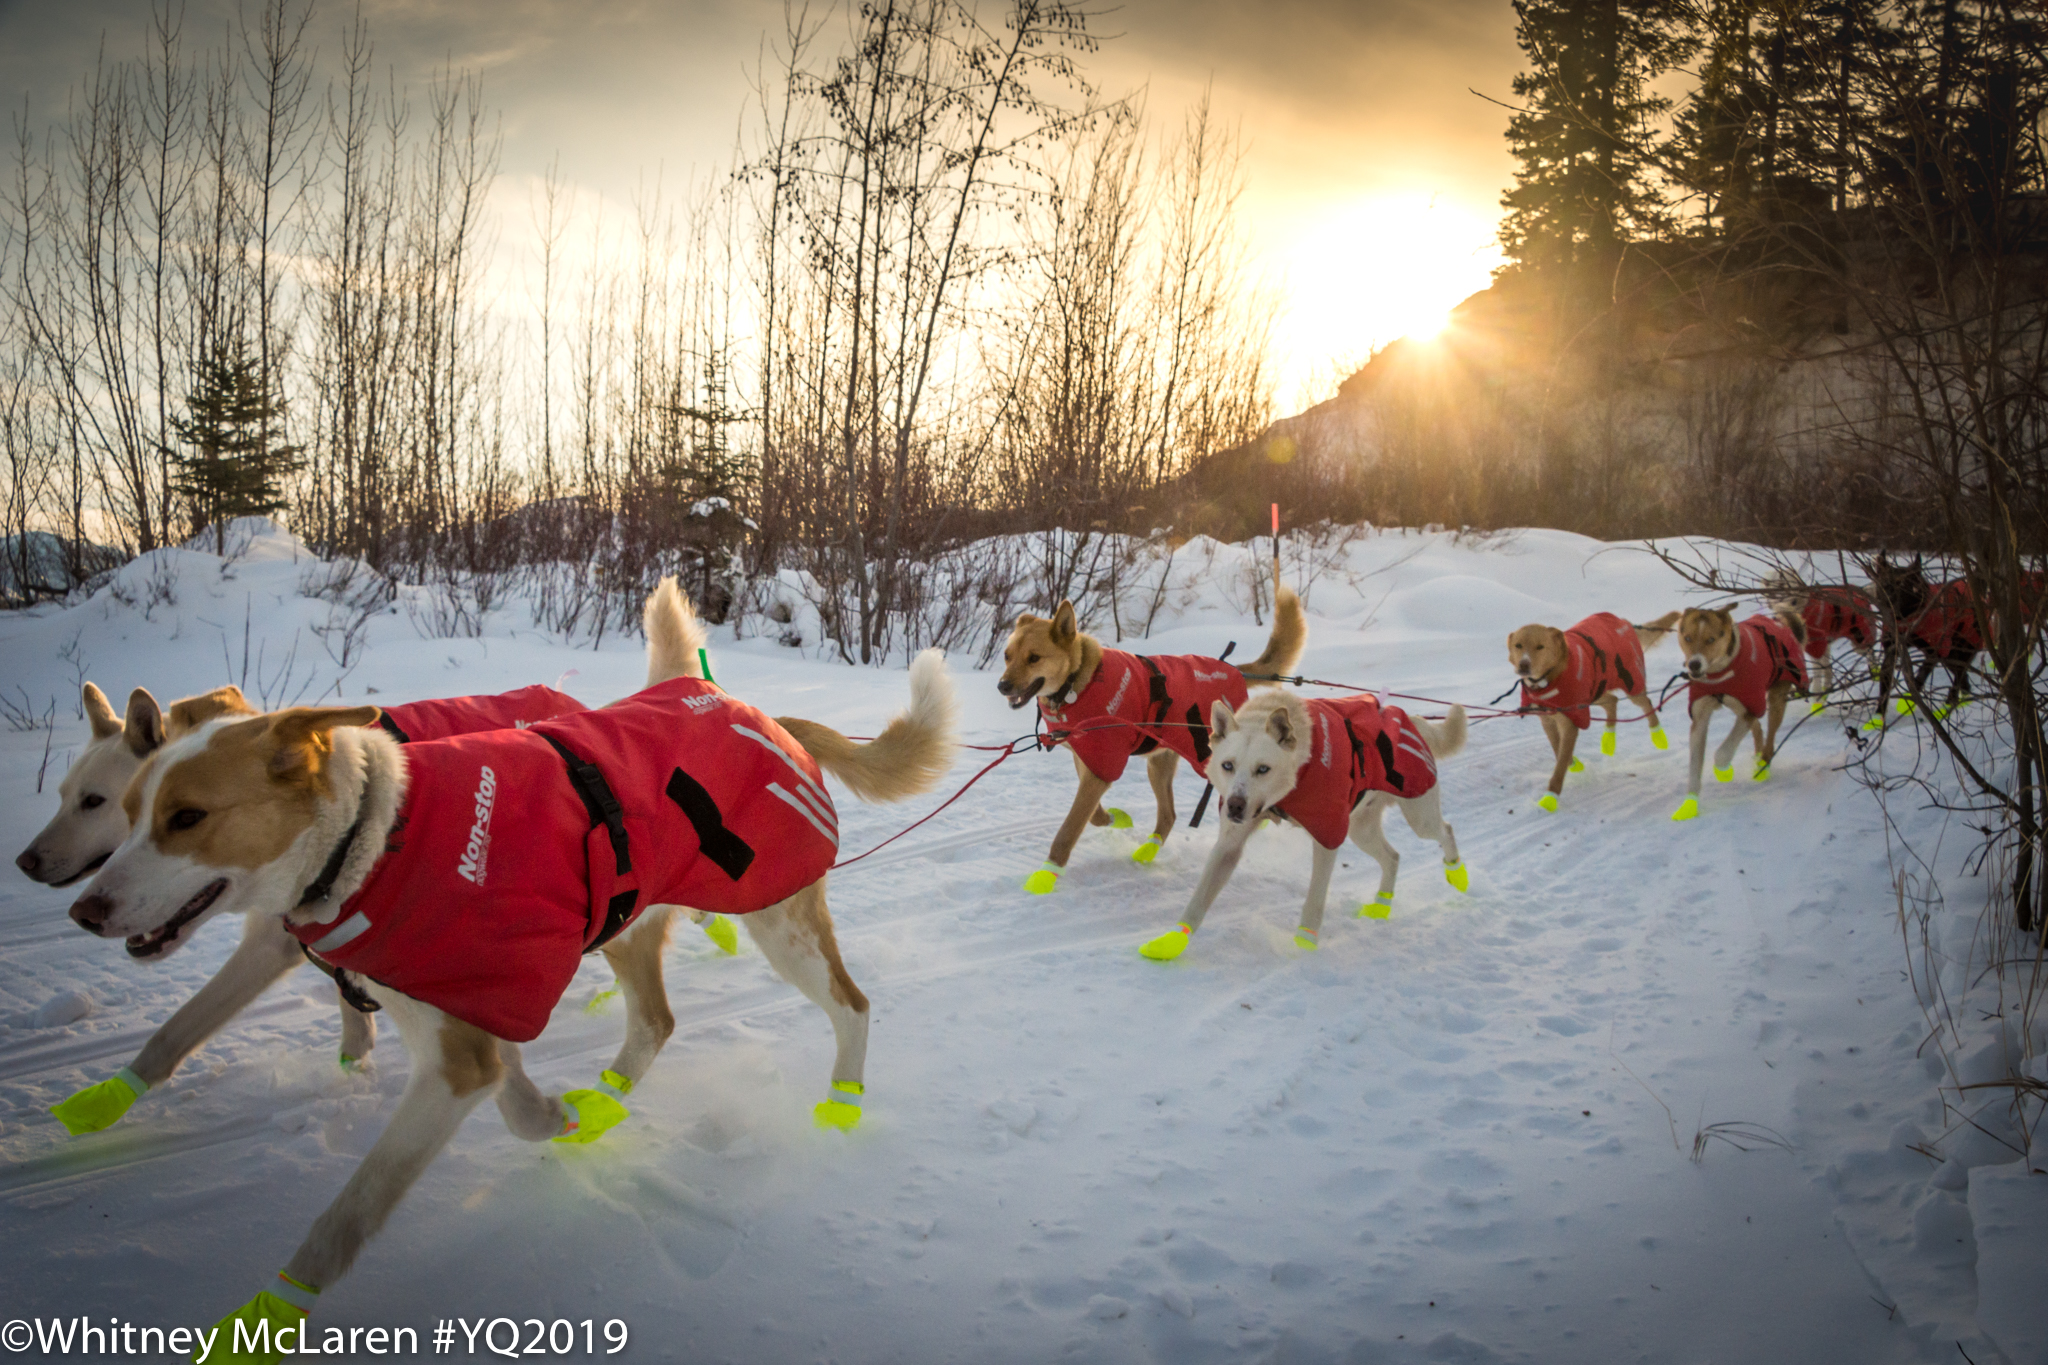 Sled dogs, wearing red jackets and neon-yellow booties, mush down a snowy trail with the sun low on the horizon over mountains in the background.